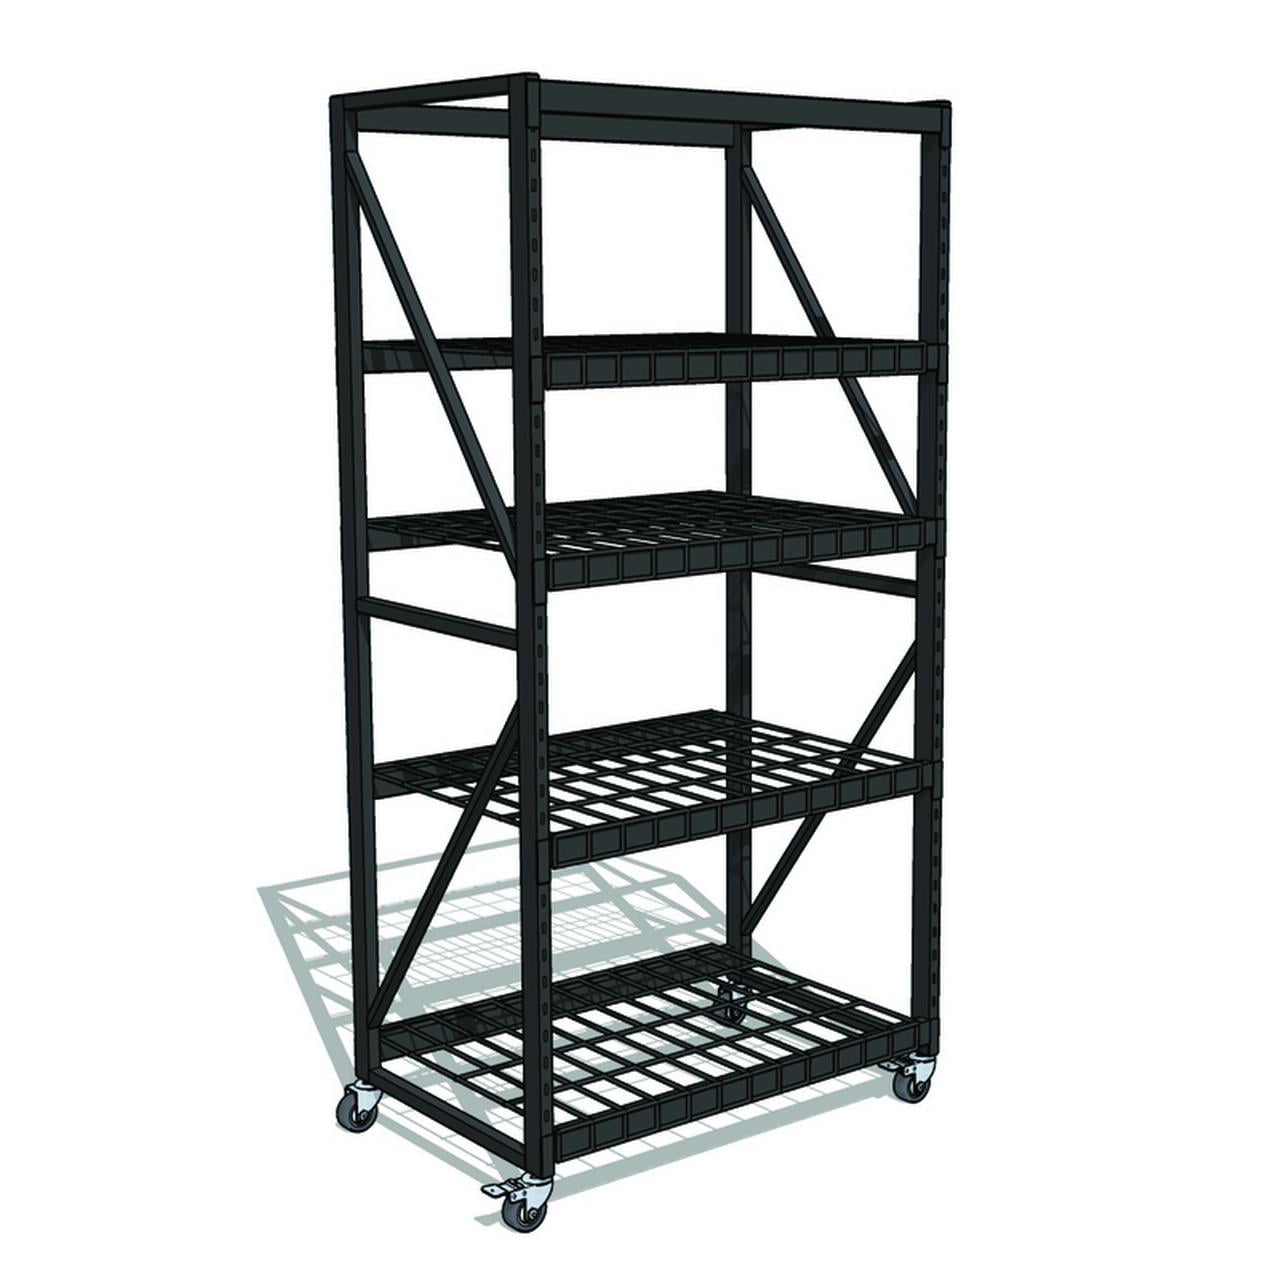 Picture of Retail First 9070739 42 x 27 x 82 in. Widespan Display Rack, Black - Metal